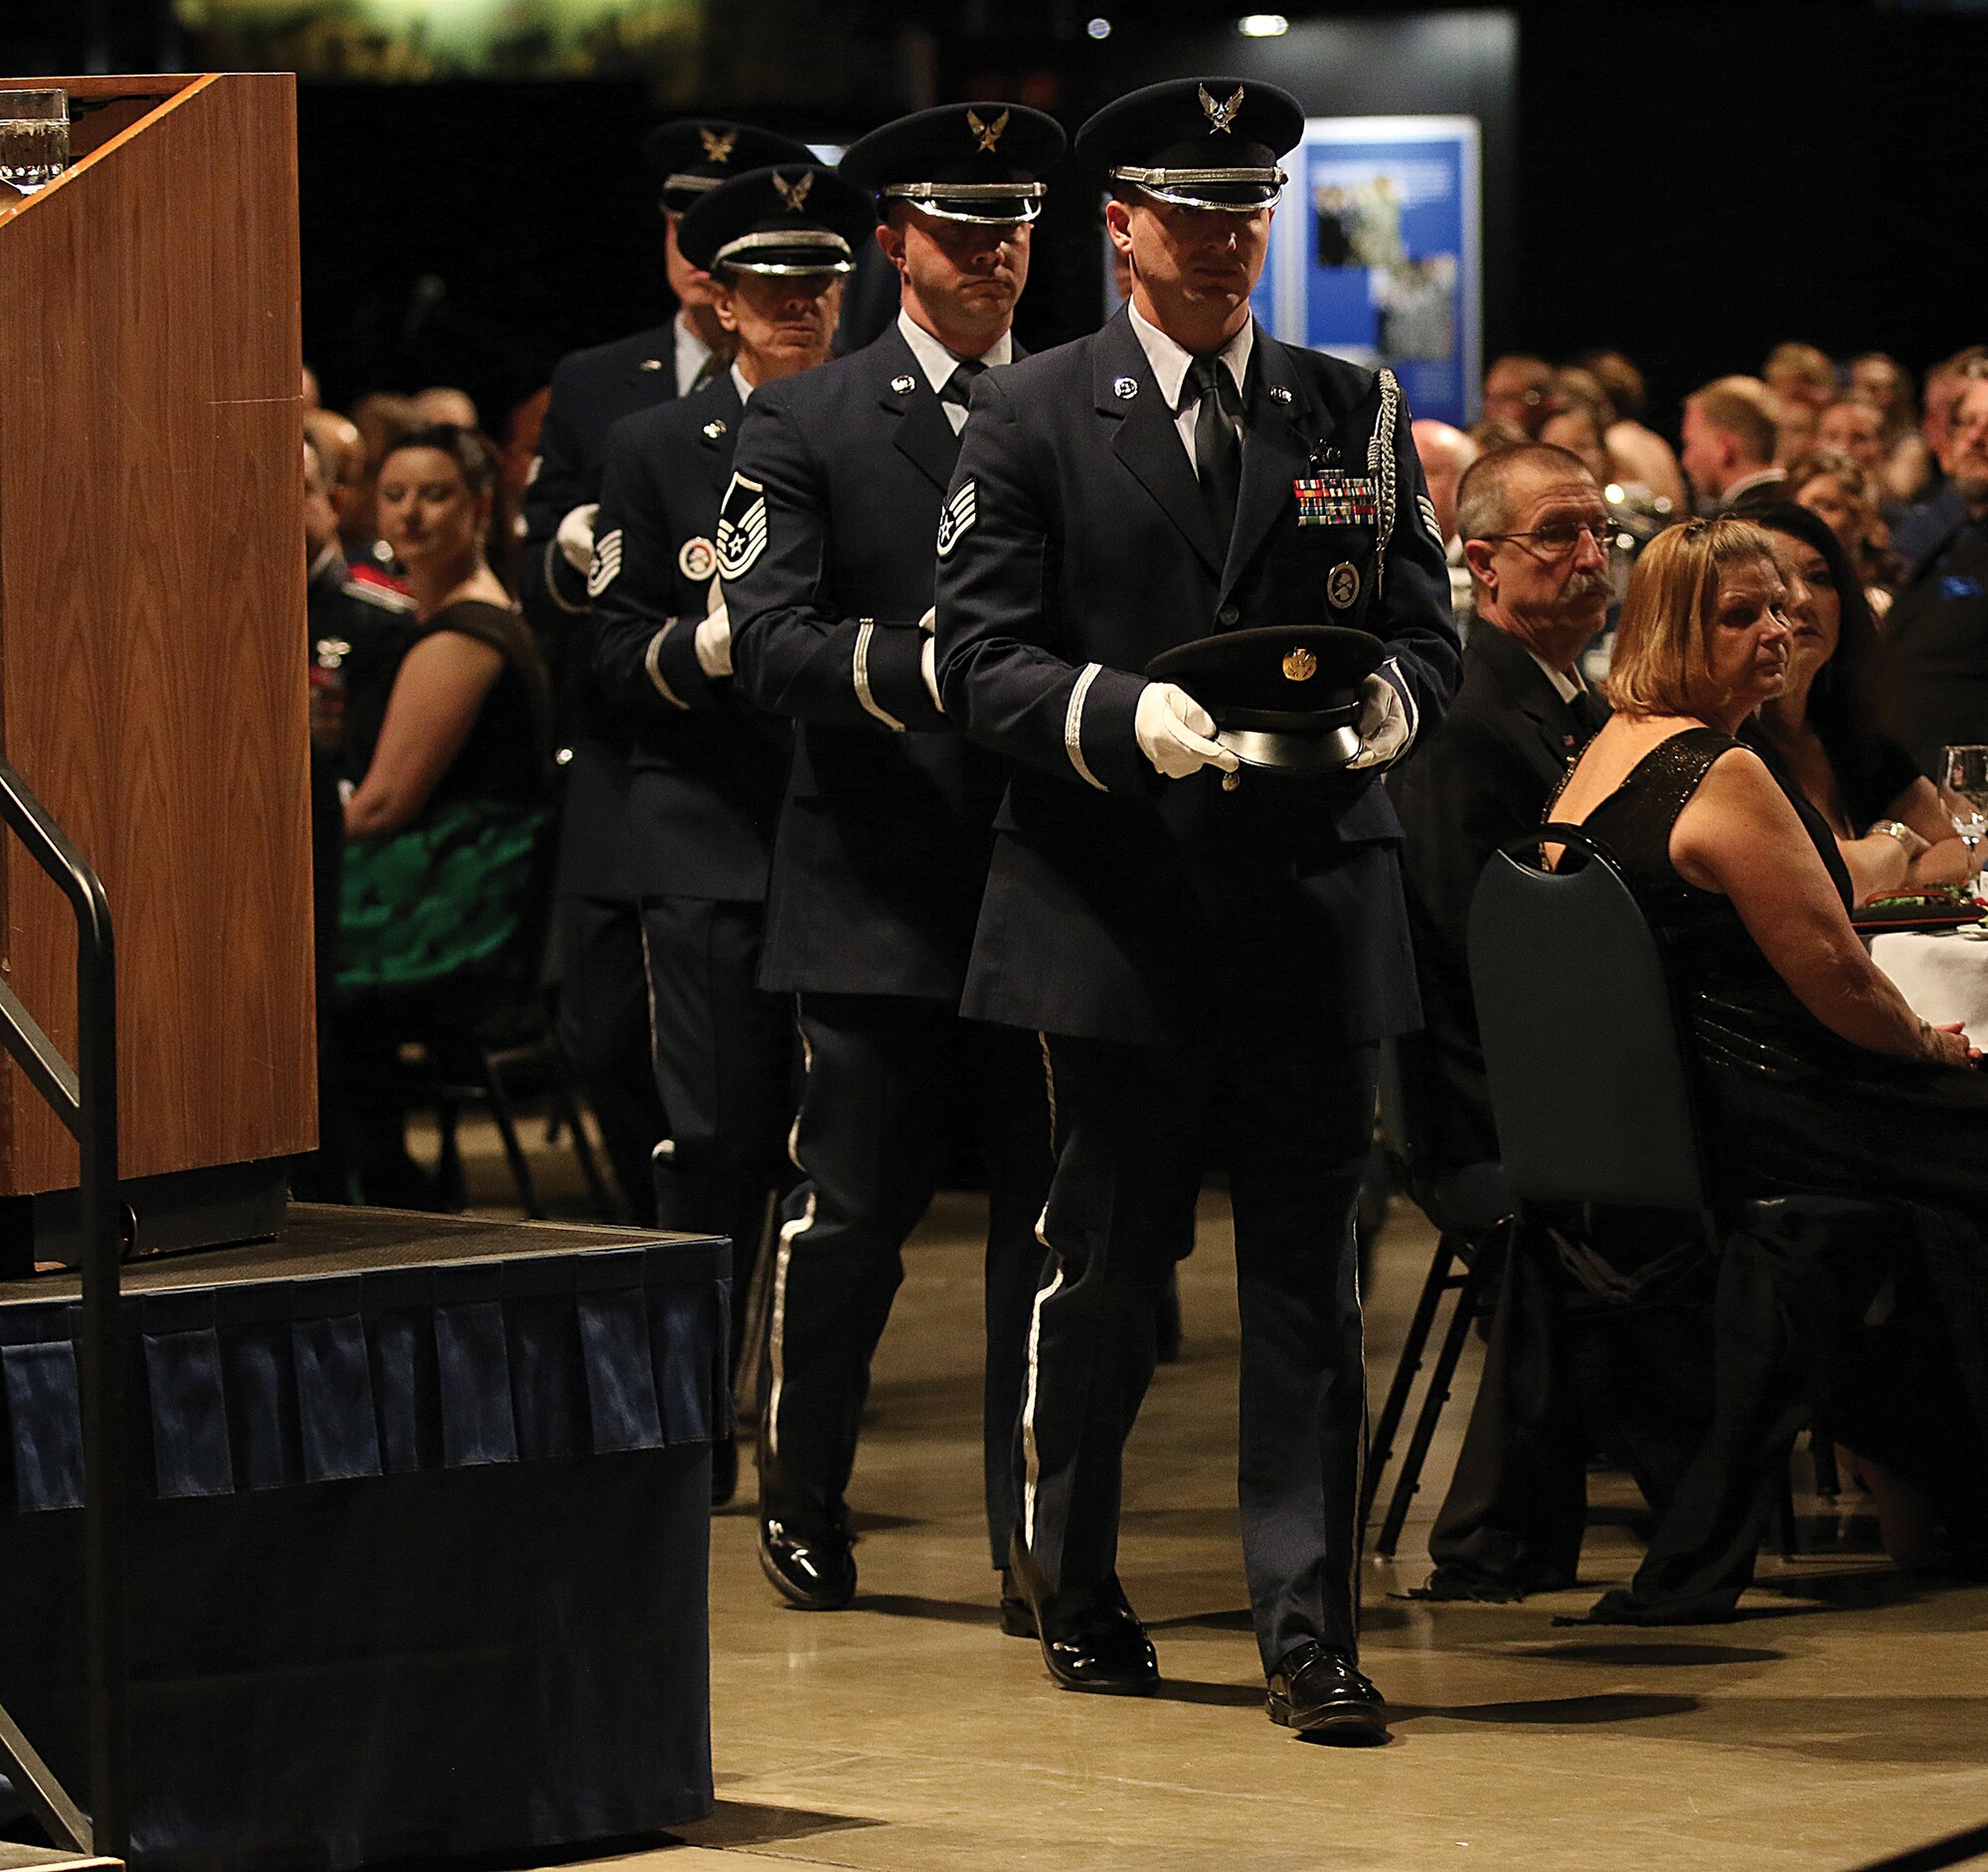 The 445th Airlift Wing Honor Guard performs a solemn POW/MIA table ceremony during the 445th AW annual awards banquet April 7, 2018.